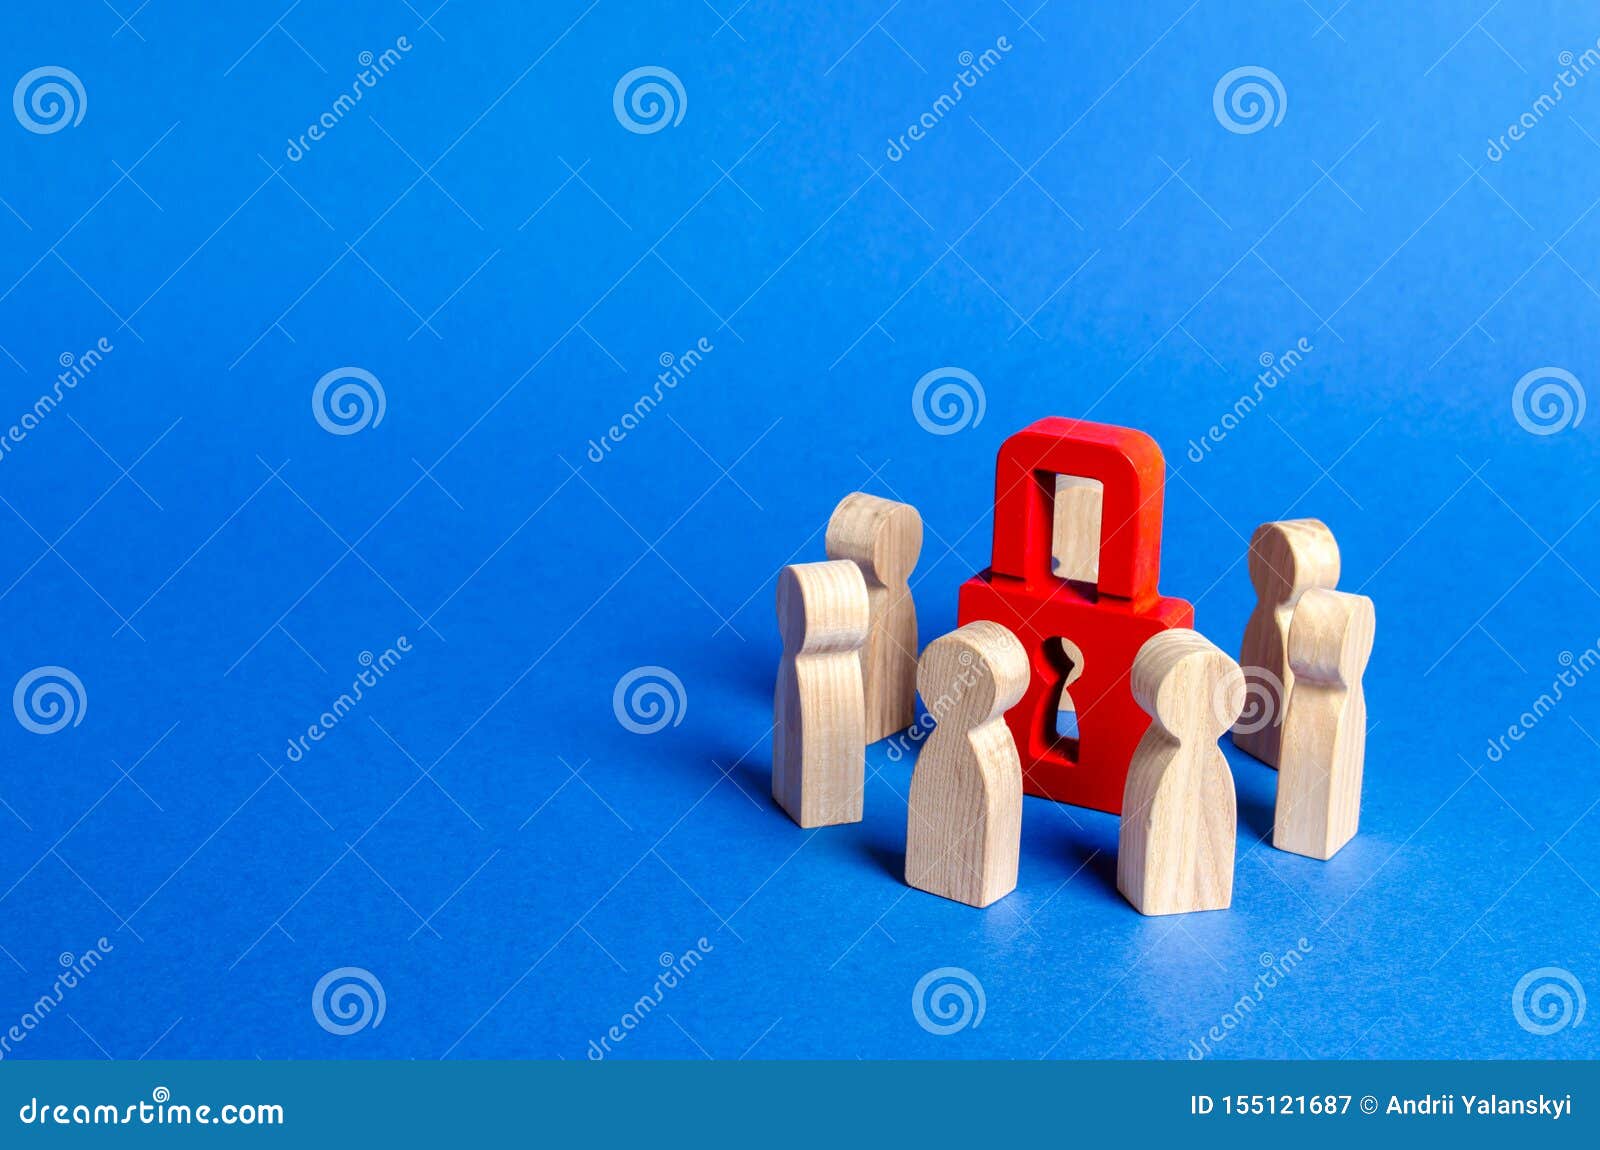 wooden figures of people surround red padlock. concept of protection of personal data trade secrets, dedication to secrets